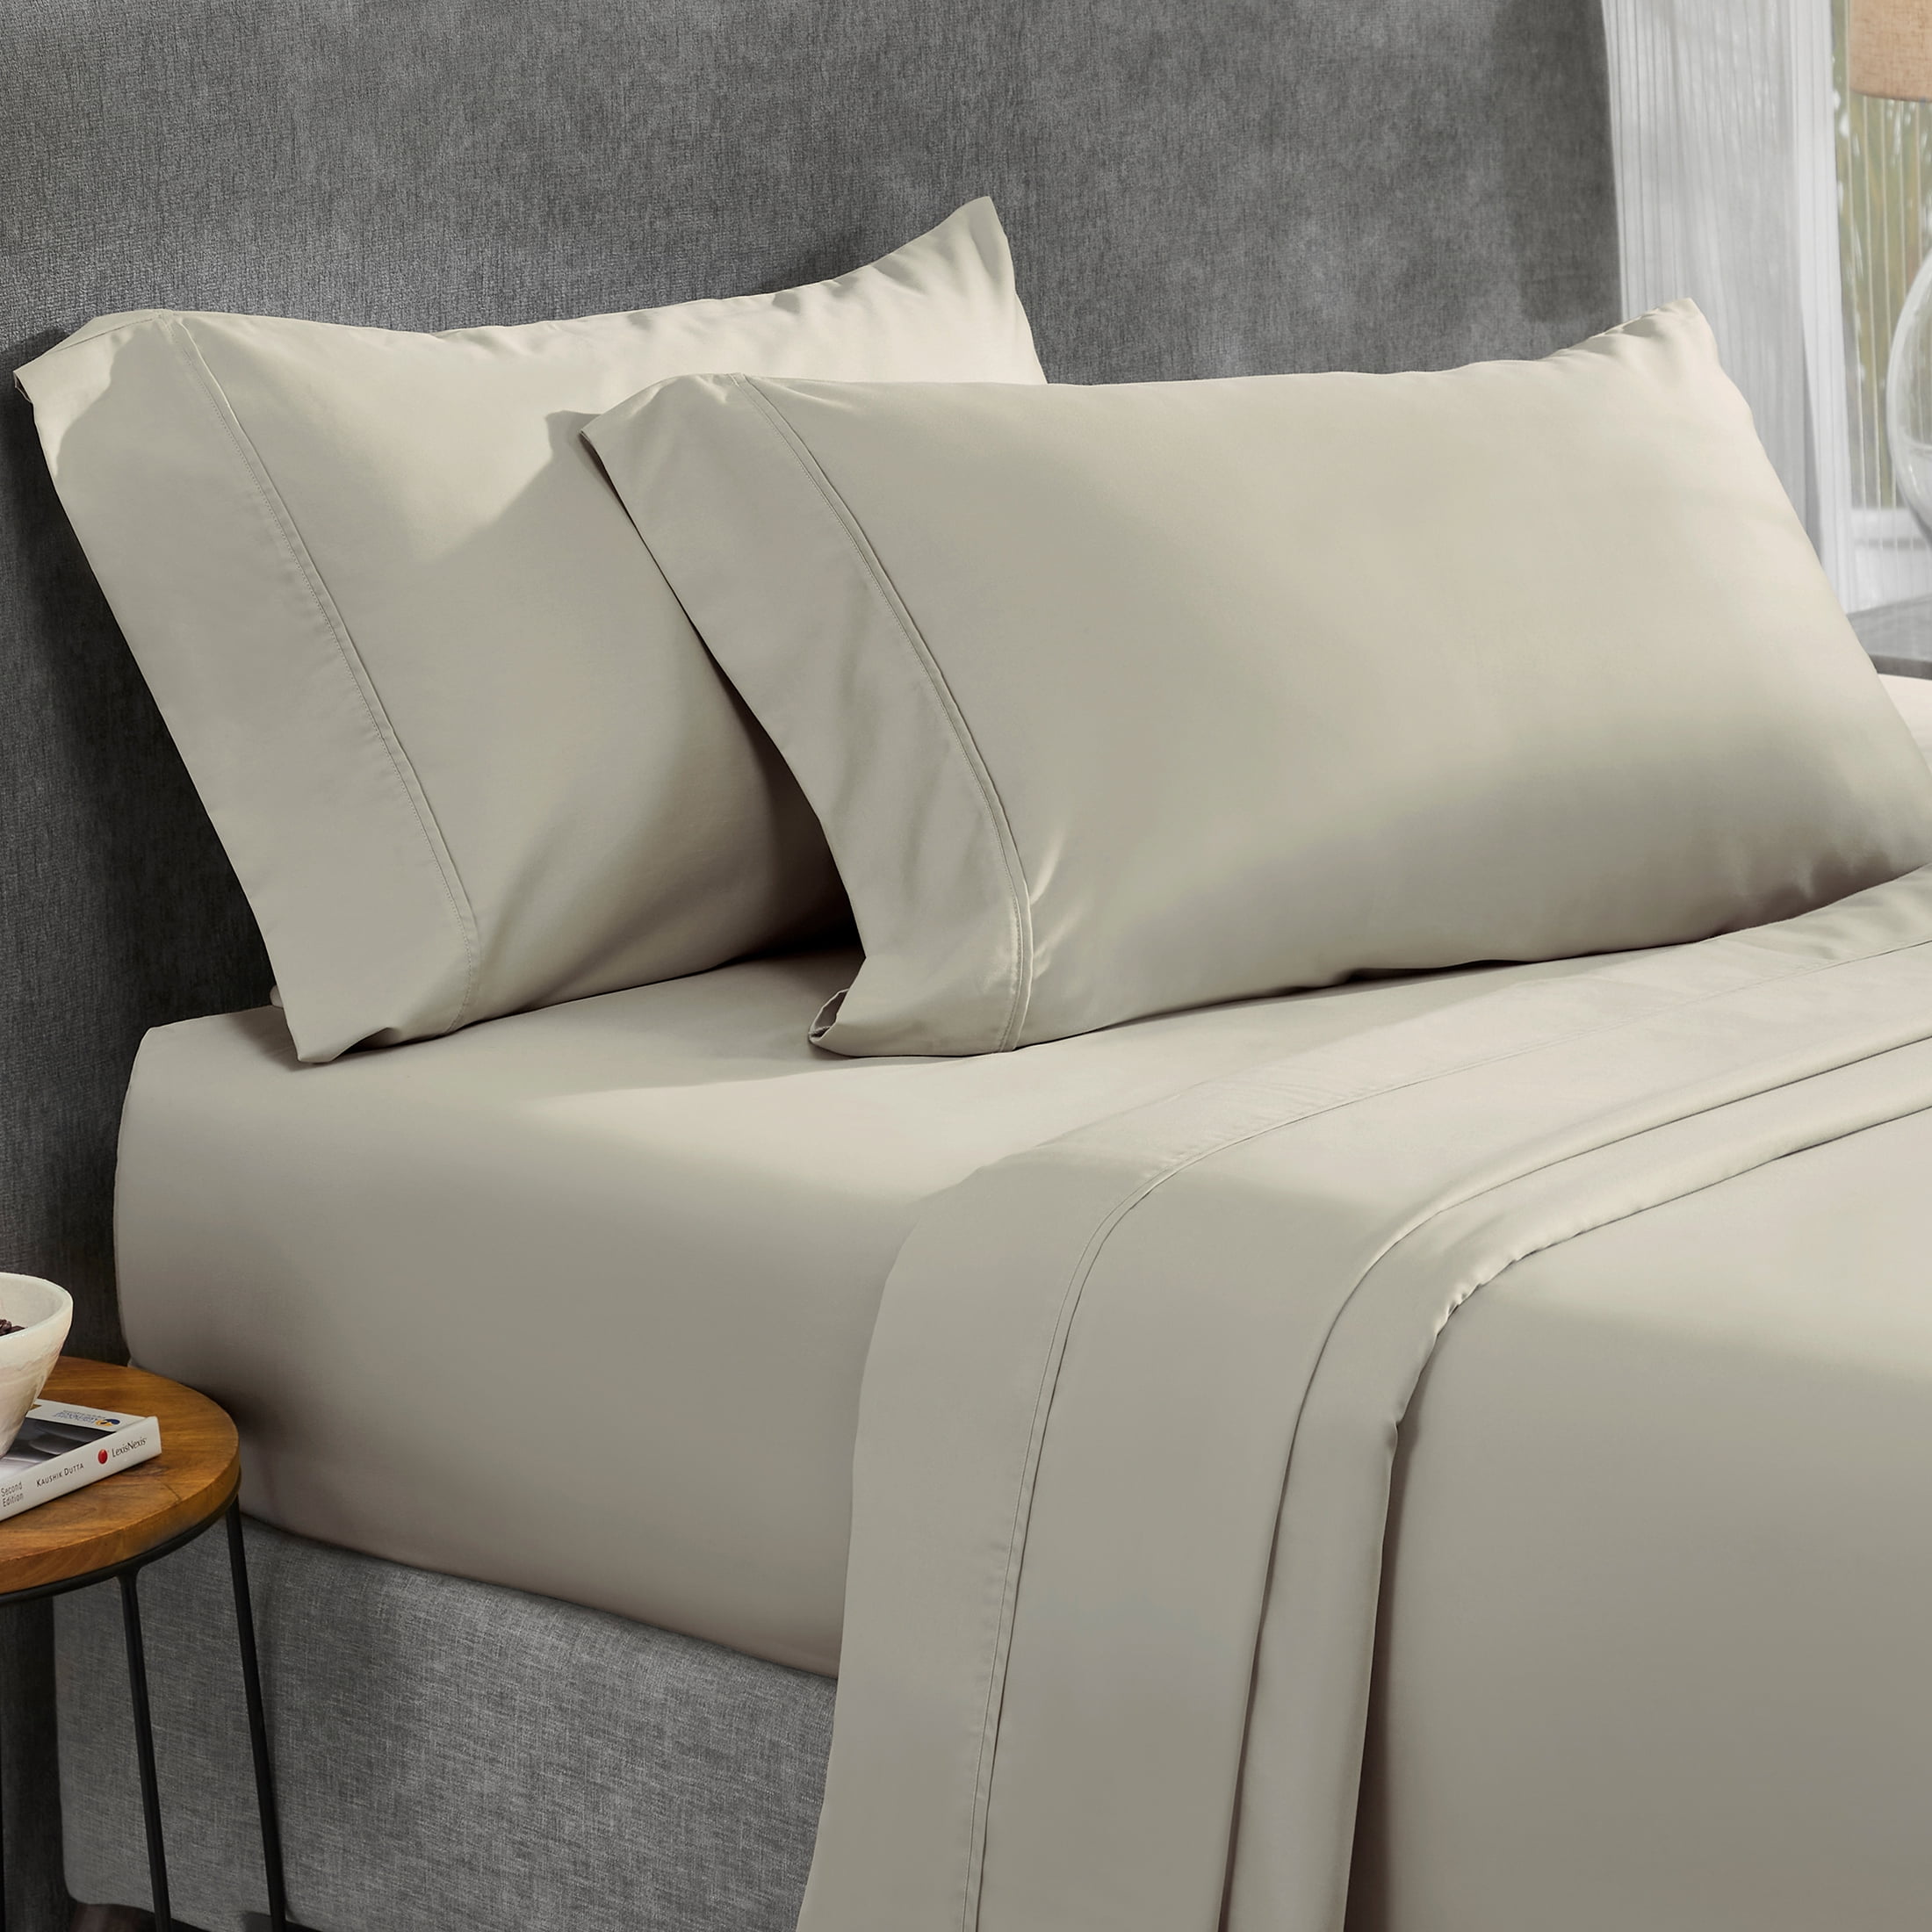 Details about   Tribeca Living 800 Thread Count Egyptian Cotton Sateen Extra Deep Pocket Sheet S 